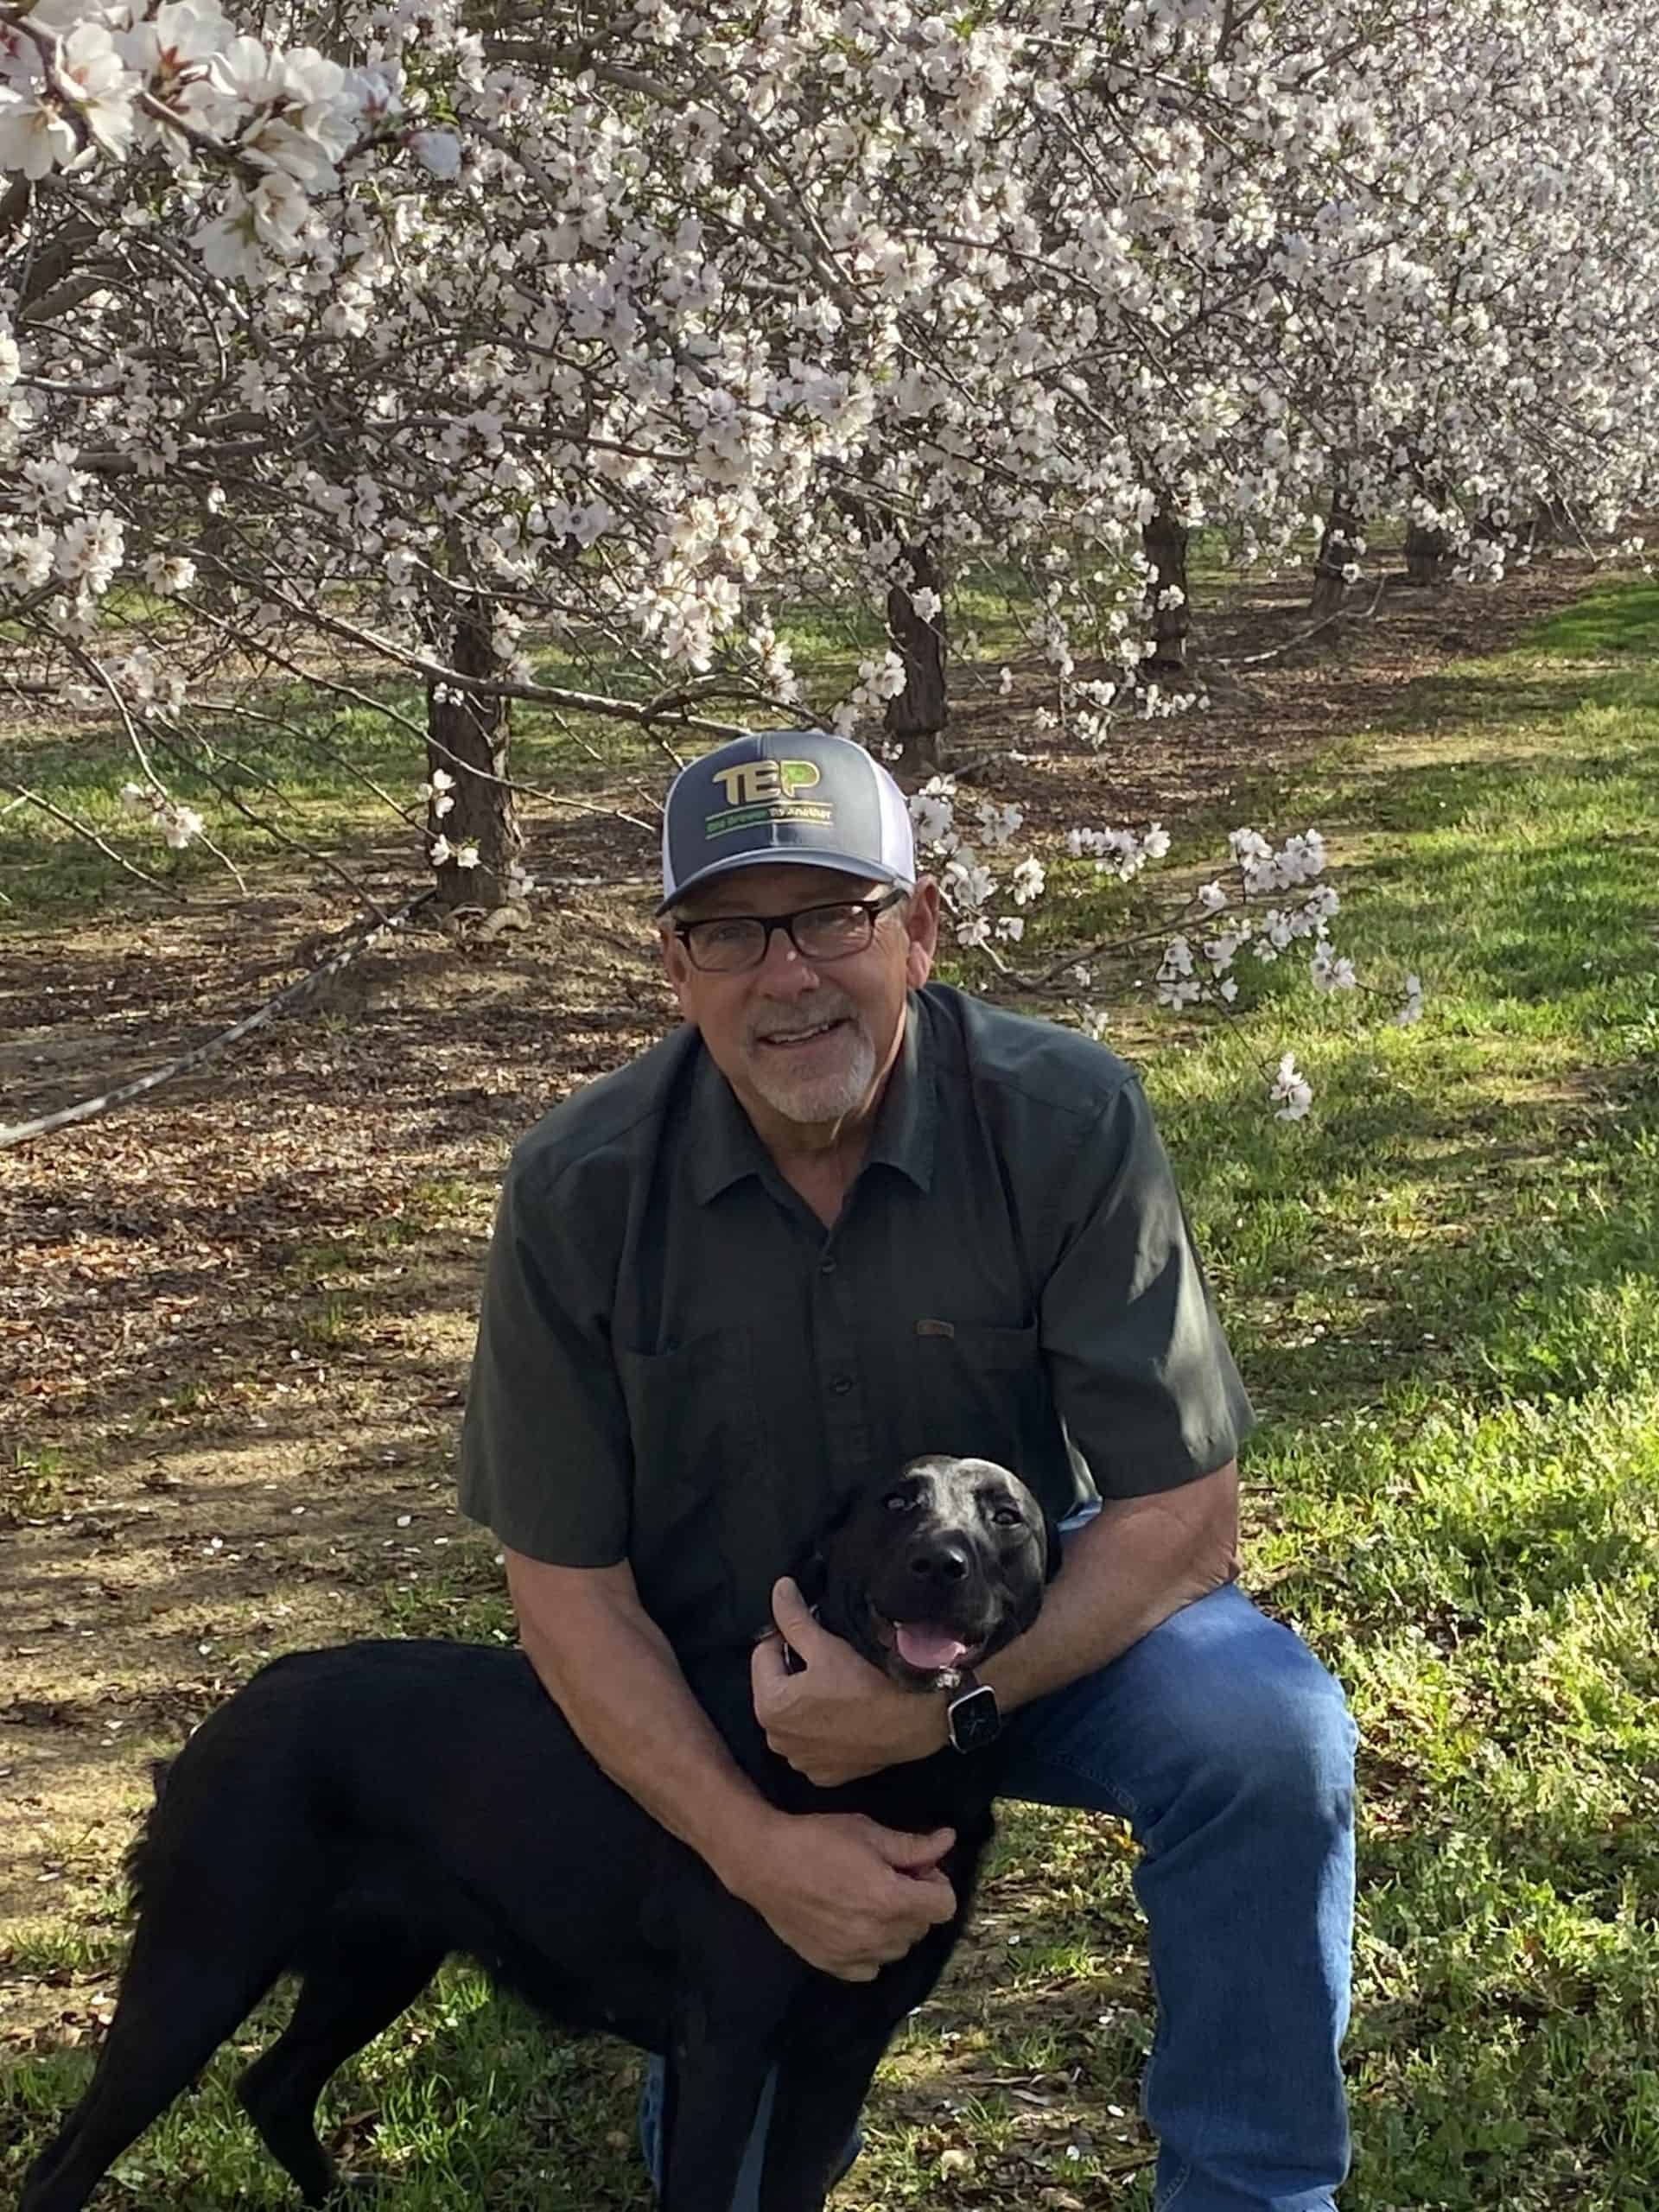  James Pingrey hugs his black dog, Millie, underneath flowering almond trees in an orchard.